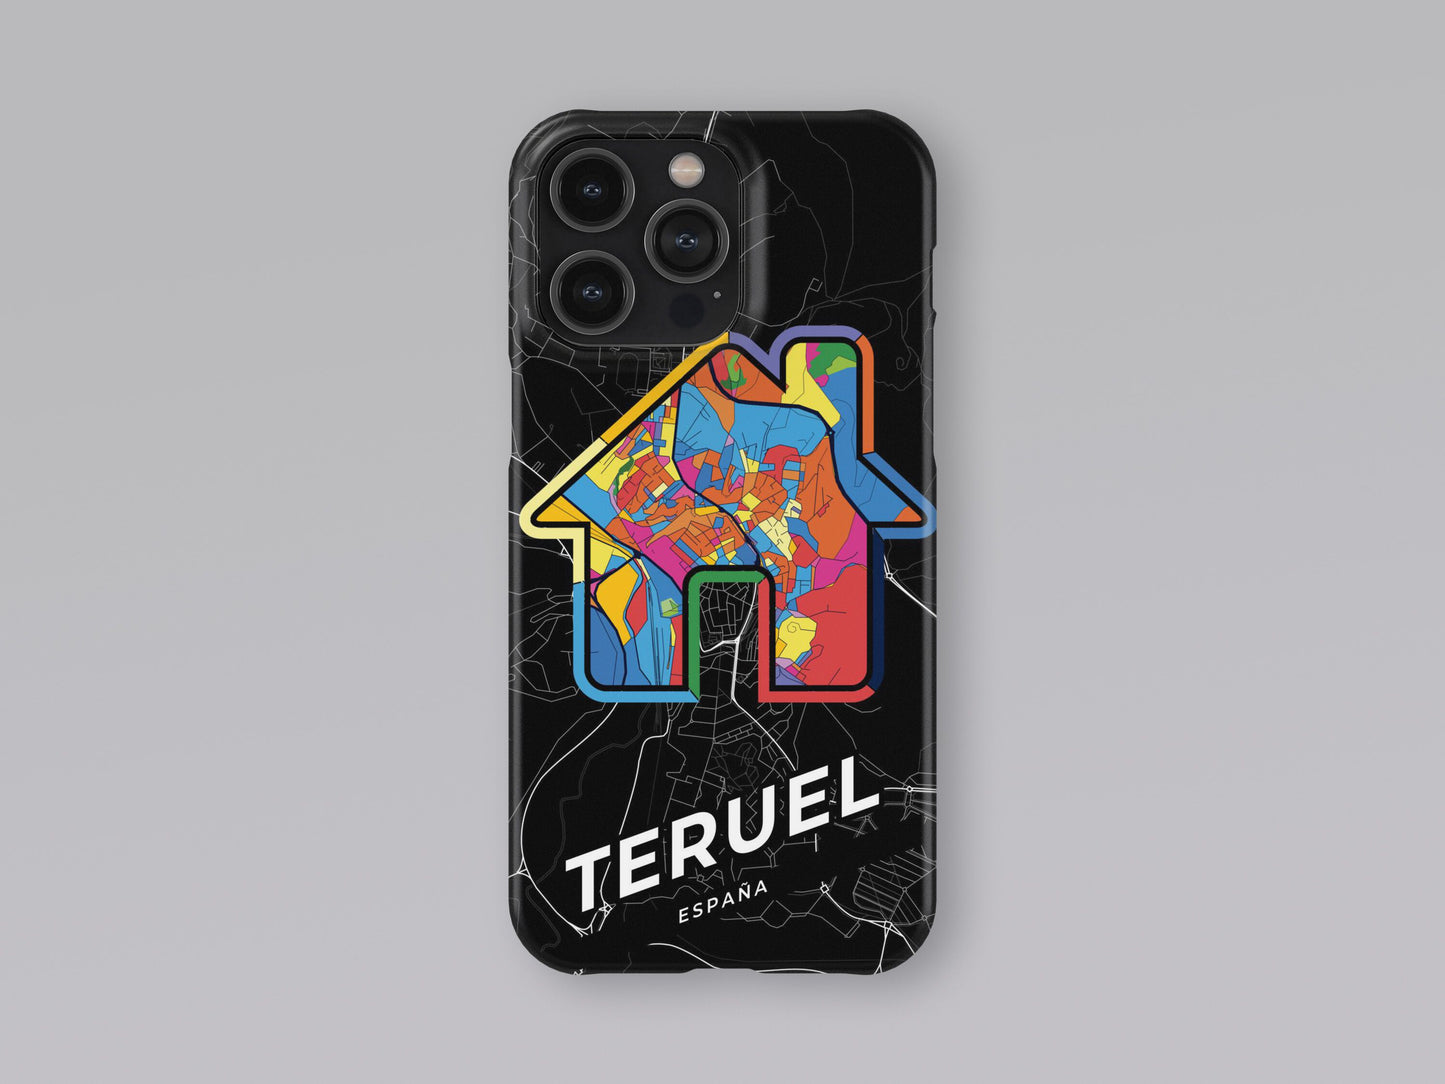 Teruel Spain slim phone case with colorful icon. Birthday, wedding or housewarming gift. Couple match cases. 3